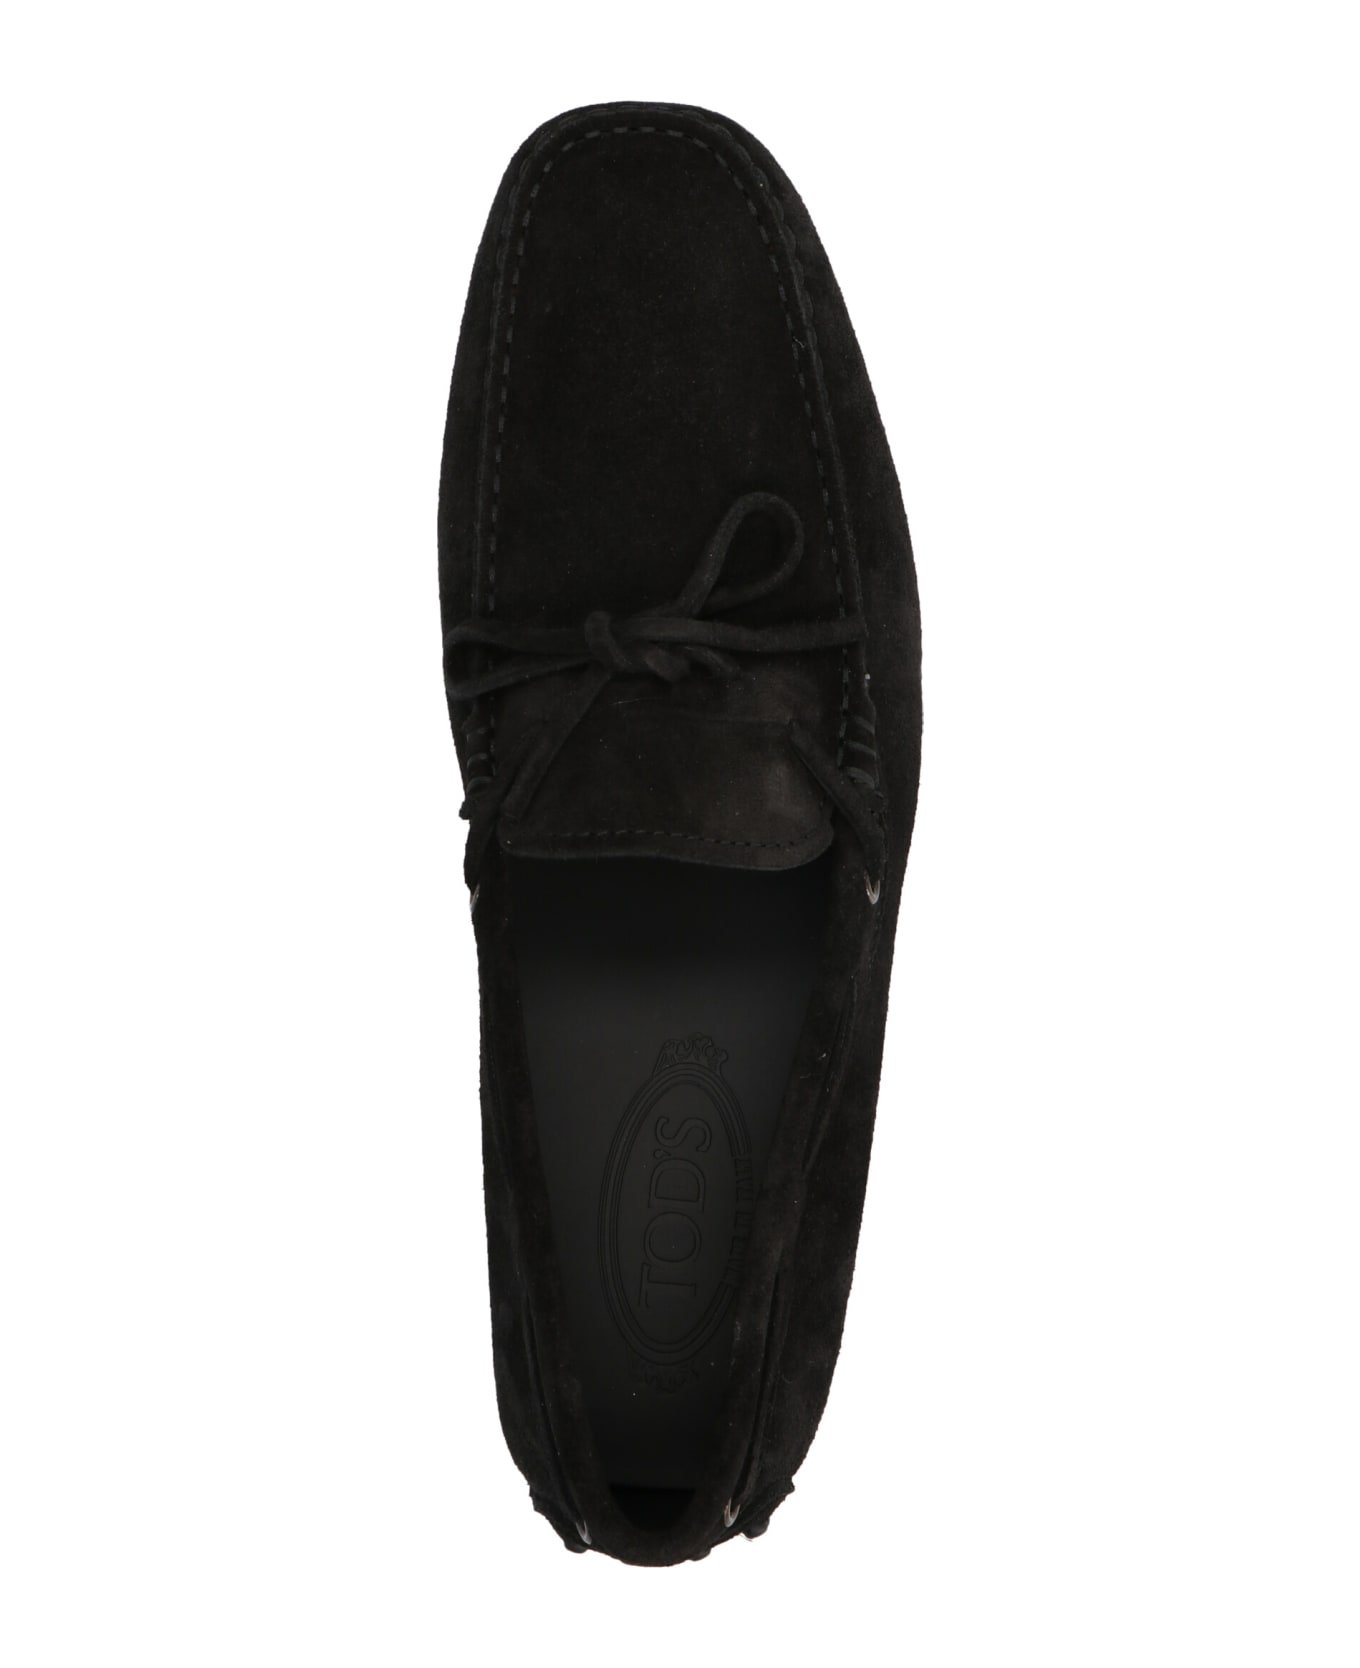 Tod's Gommino Loafers - Black